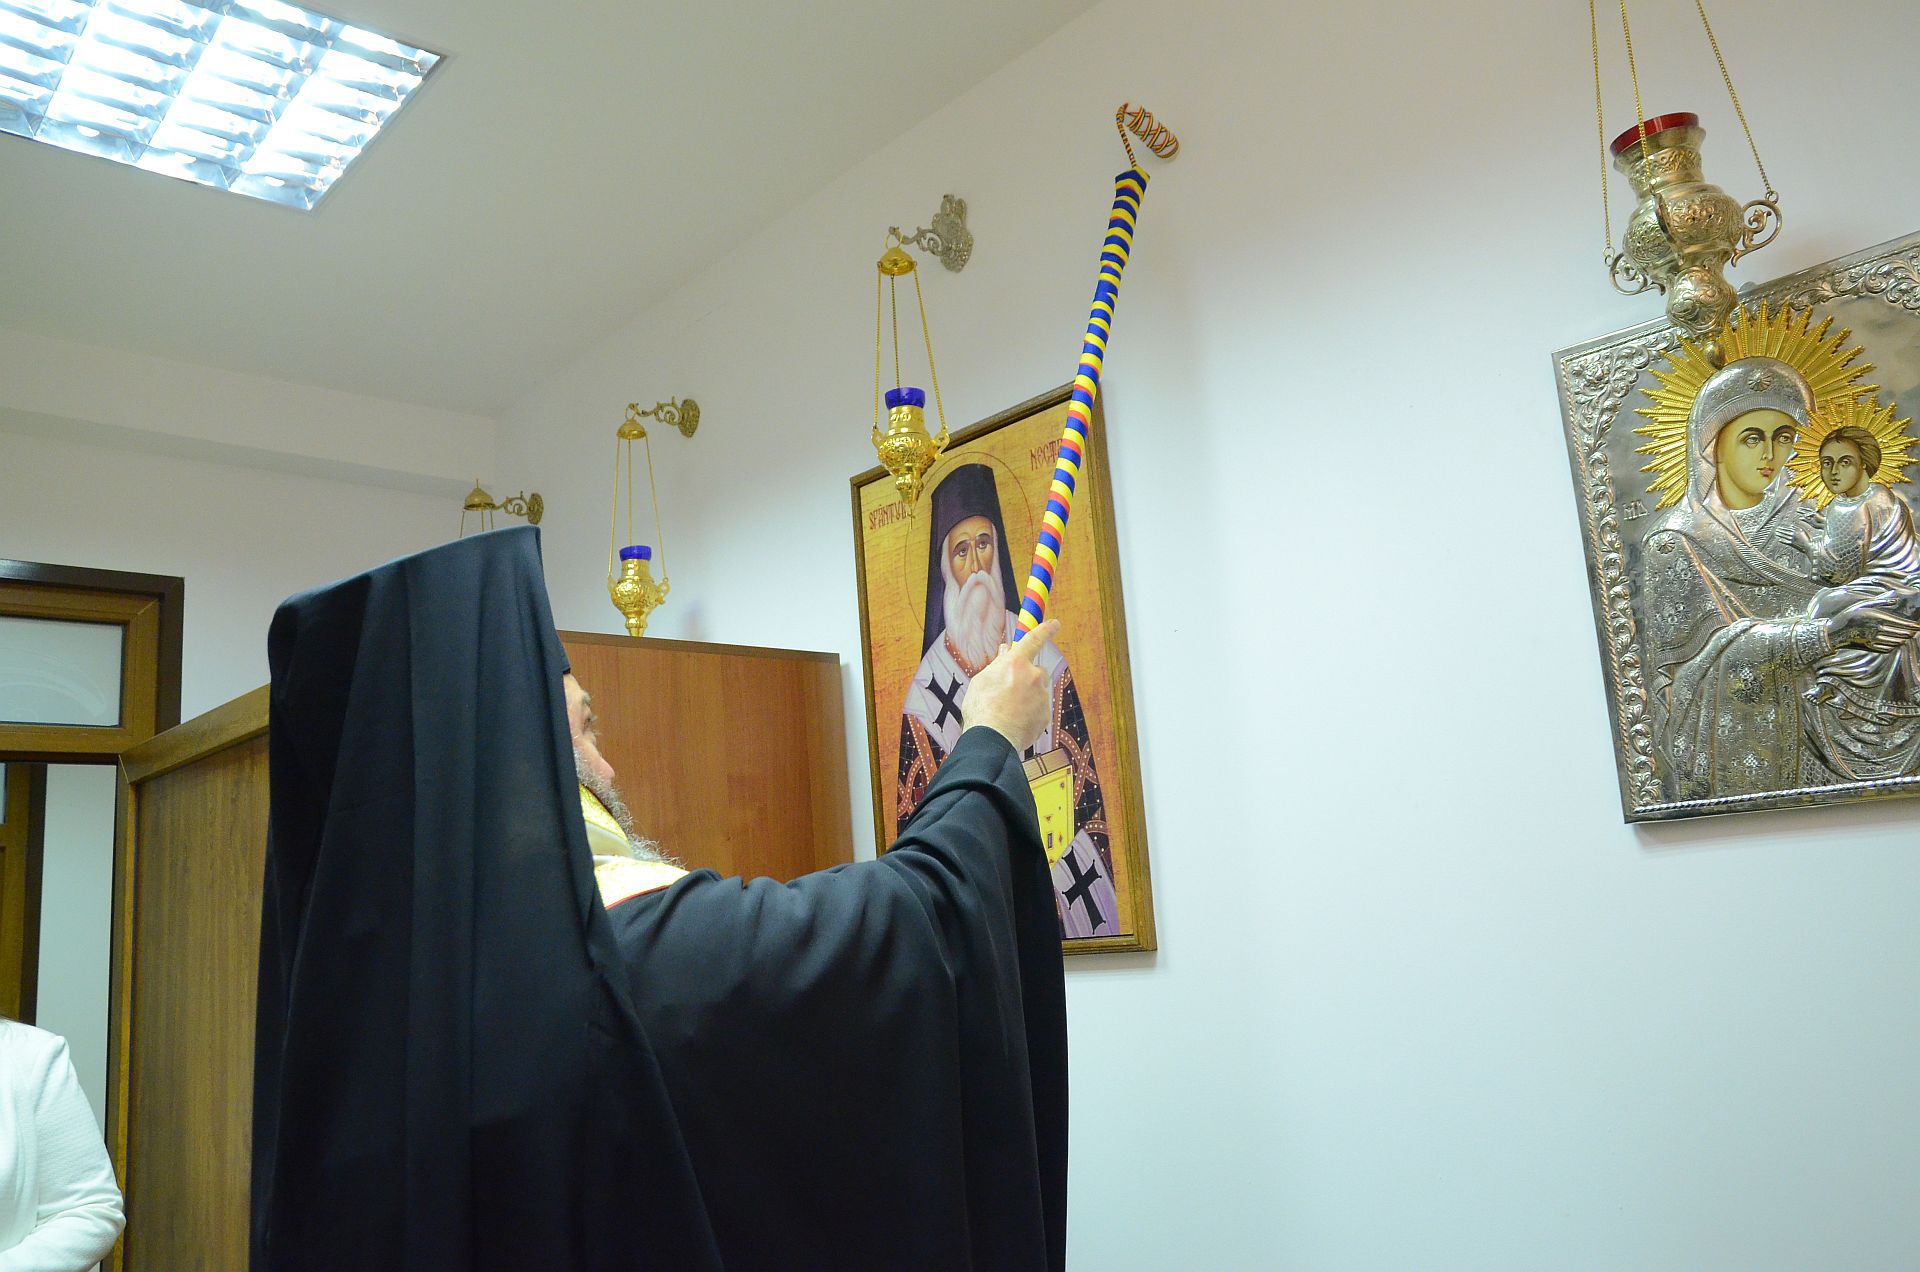 Bishop Ieronim of Sinaia blesses the painting of St Nectarios Palliative Care Centre’s Chapel